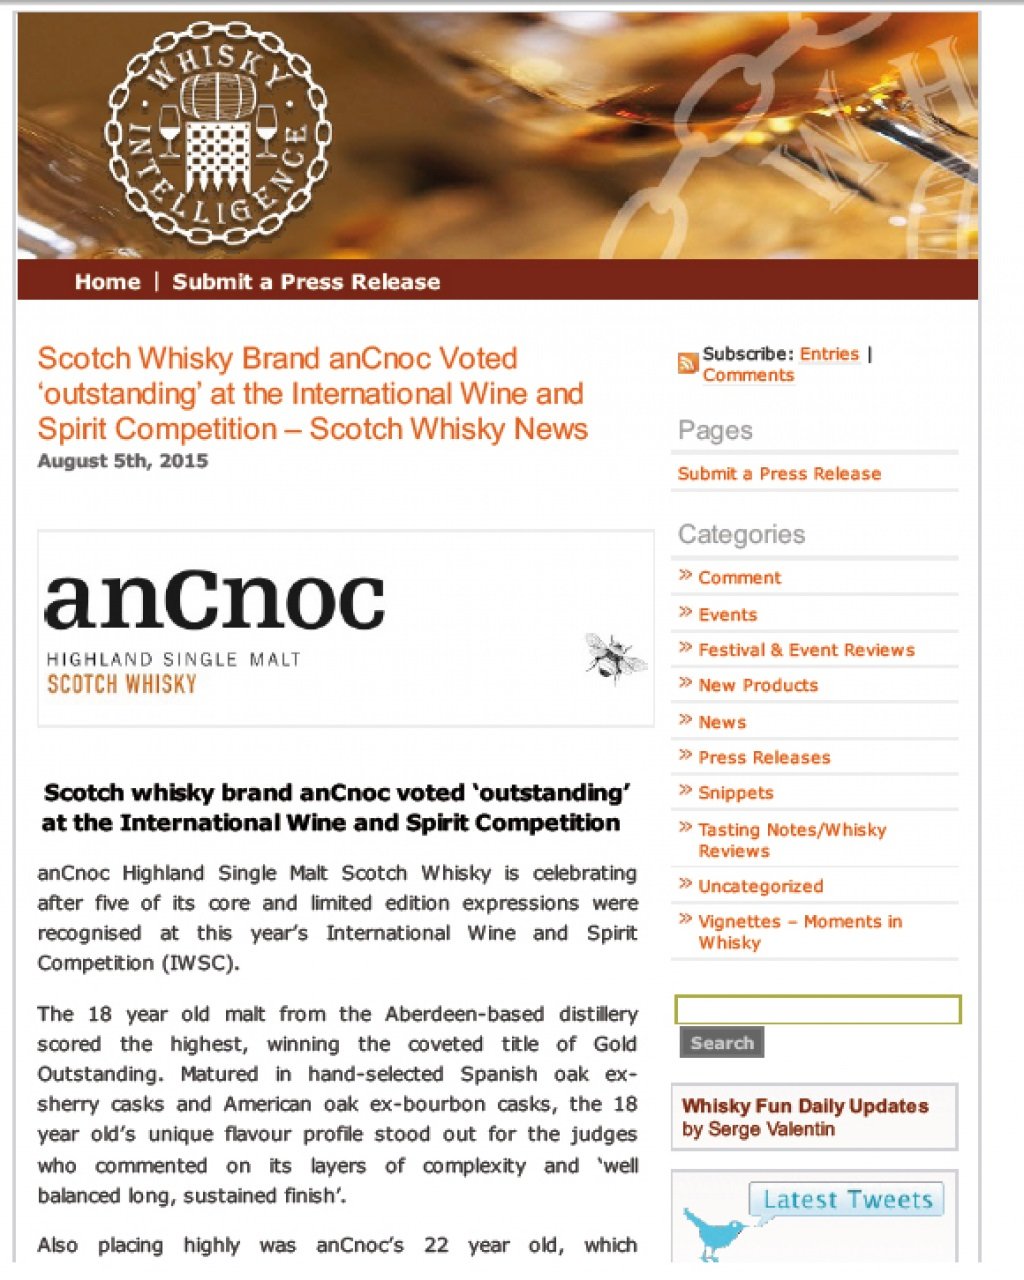 	Scotch Whisky Brand anCnoc Voted "Outstanding" at the International Wine and Spirit Competition - Scotch Whisky News